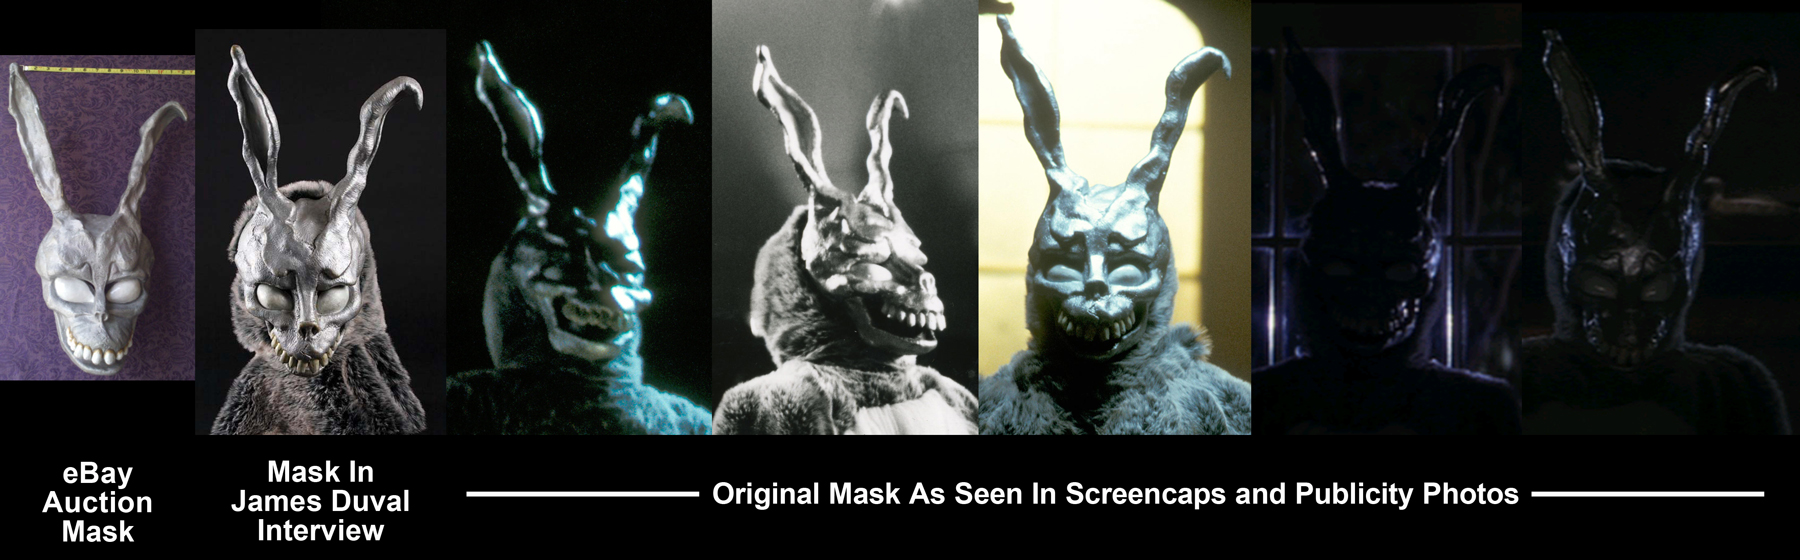 Donnie Darko Frank Bunny Mask On Ebay Is Not The Mask Seen In 2008 Original Prop Blog James Duval Interview